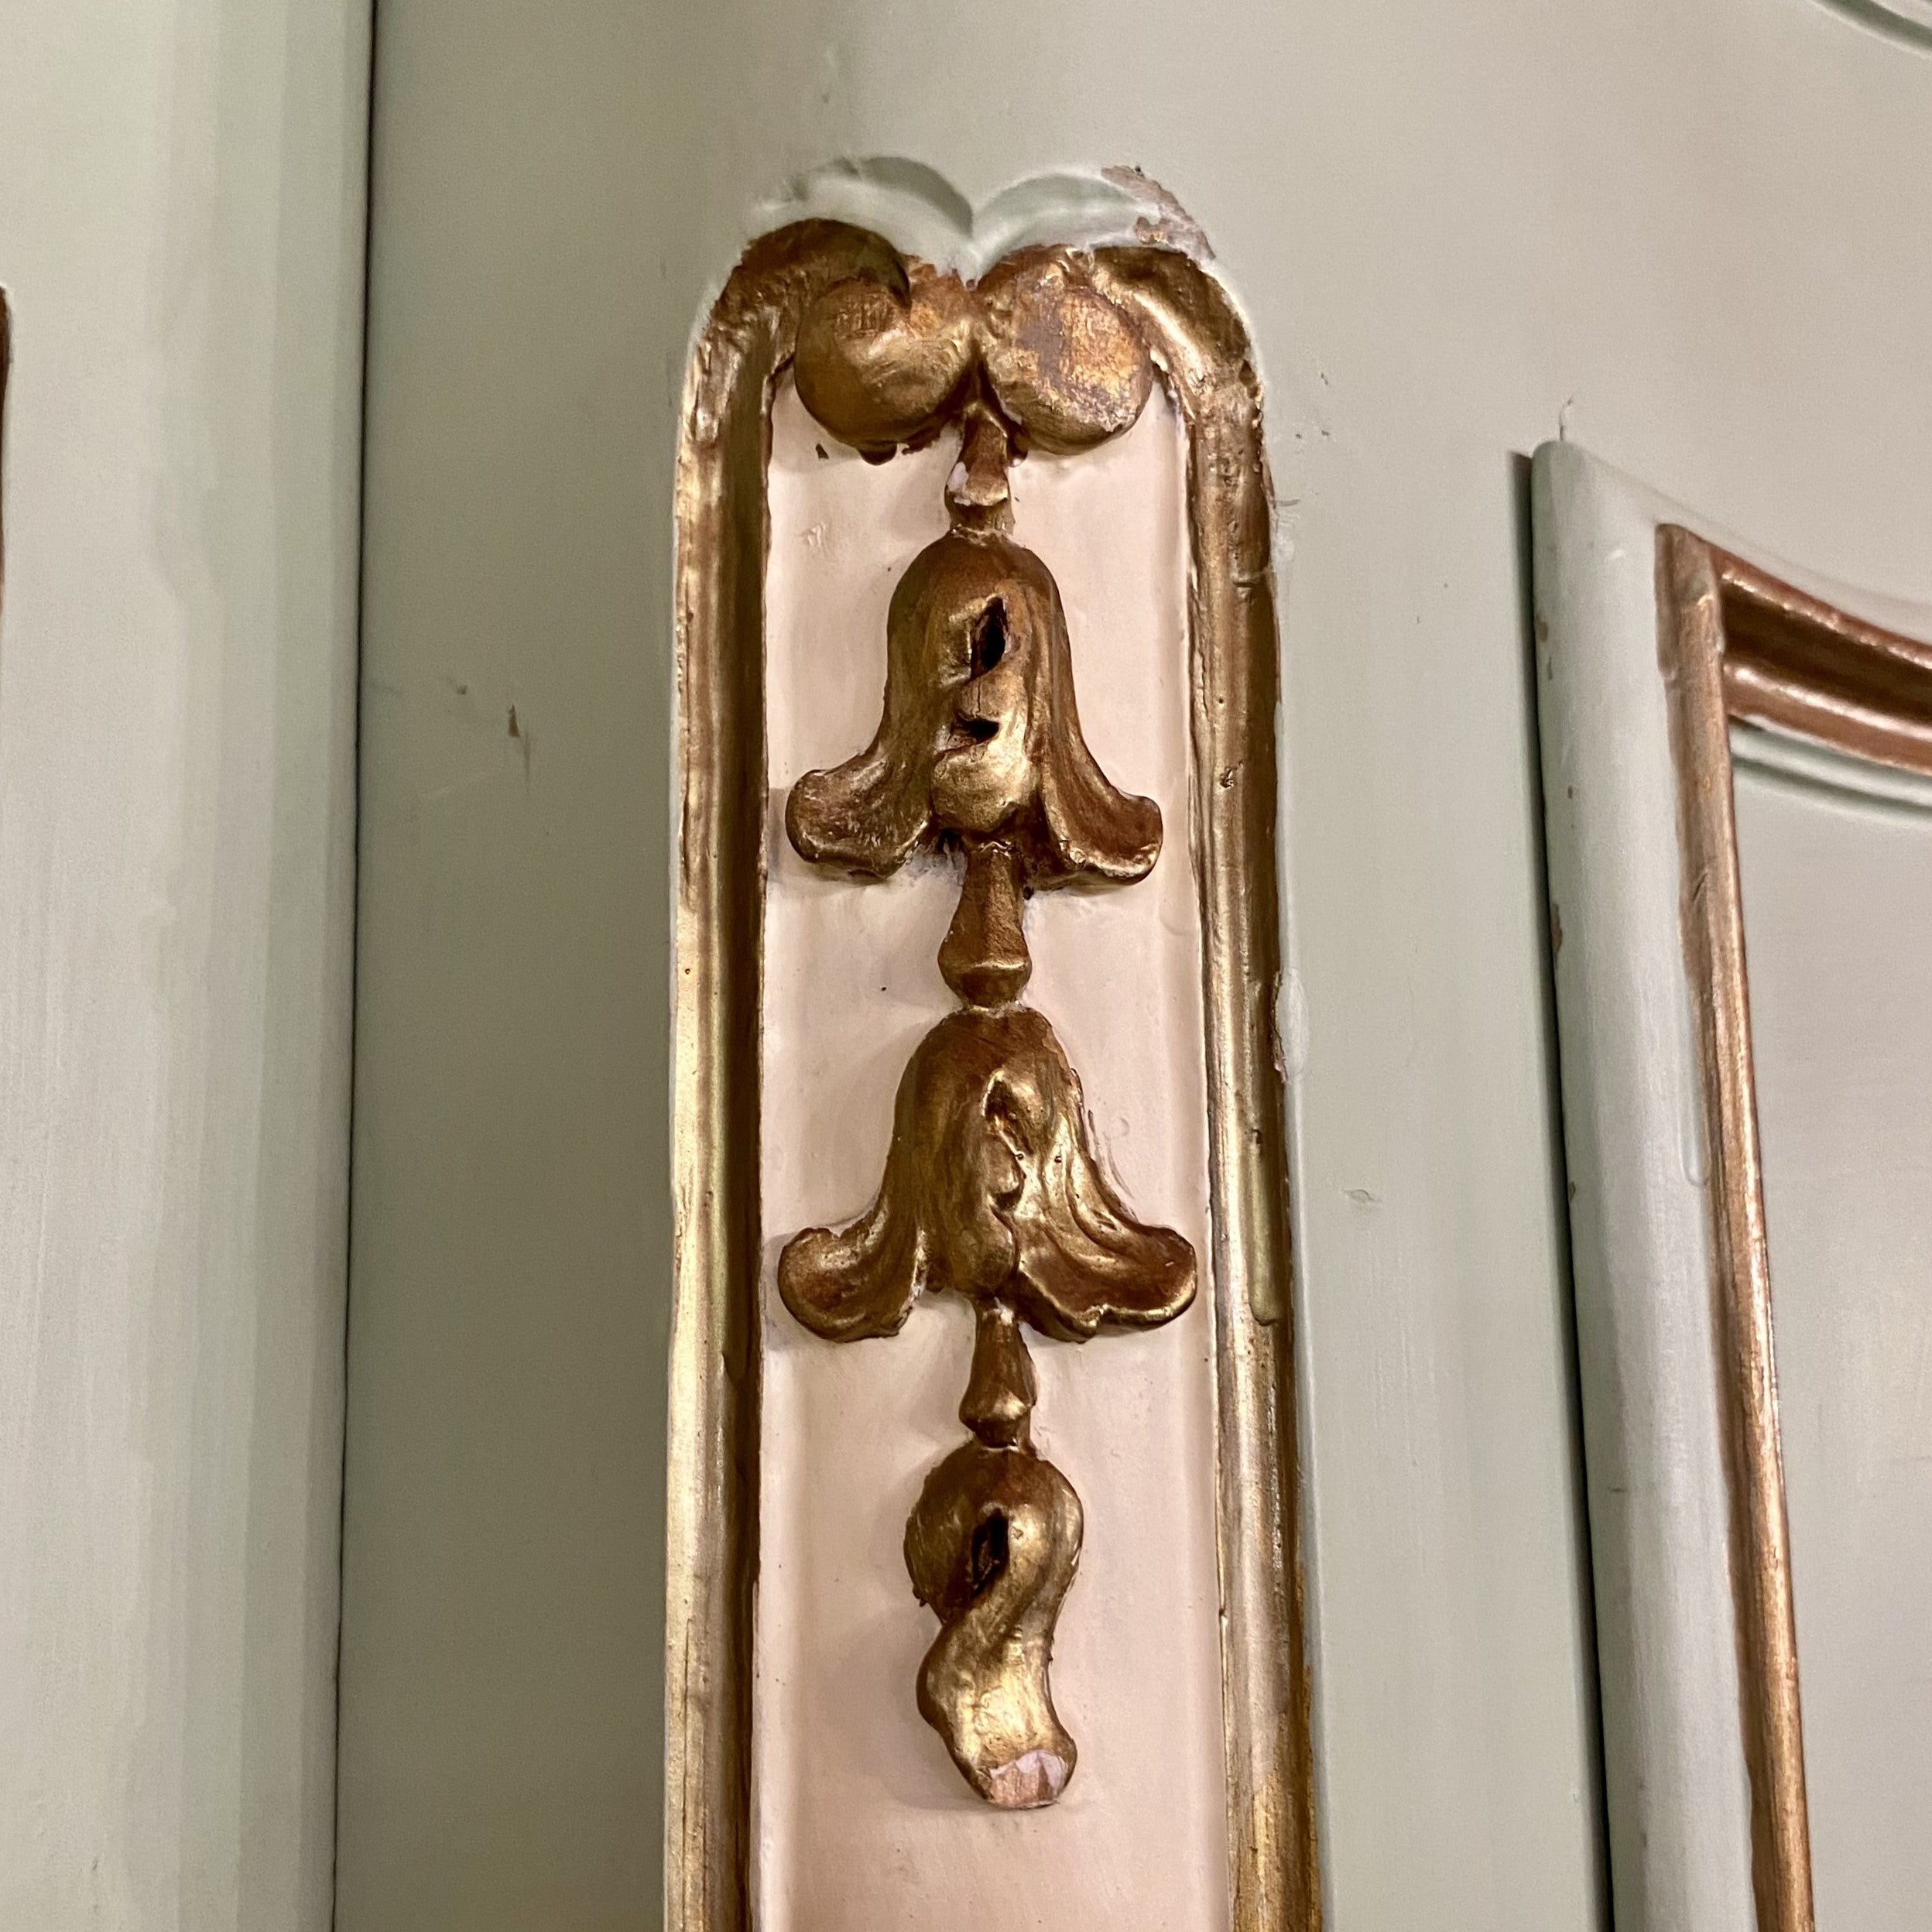 Stunning French Wardrobe with Snails Feet